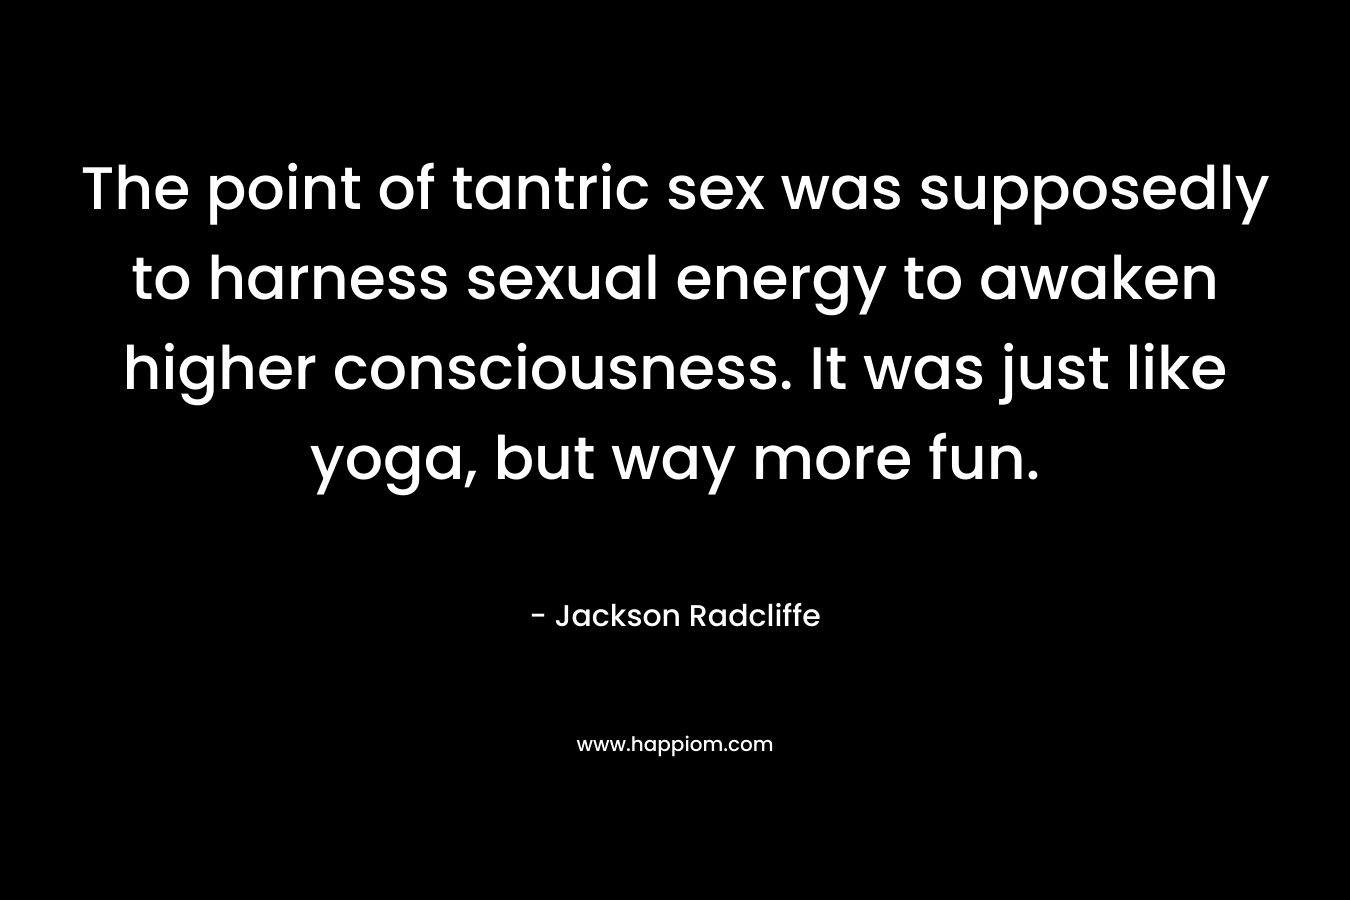 The point of tantric sex was supposedly to harness sexual energy to awaken higher consciousness. It was just like yoga, but way more fun.